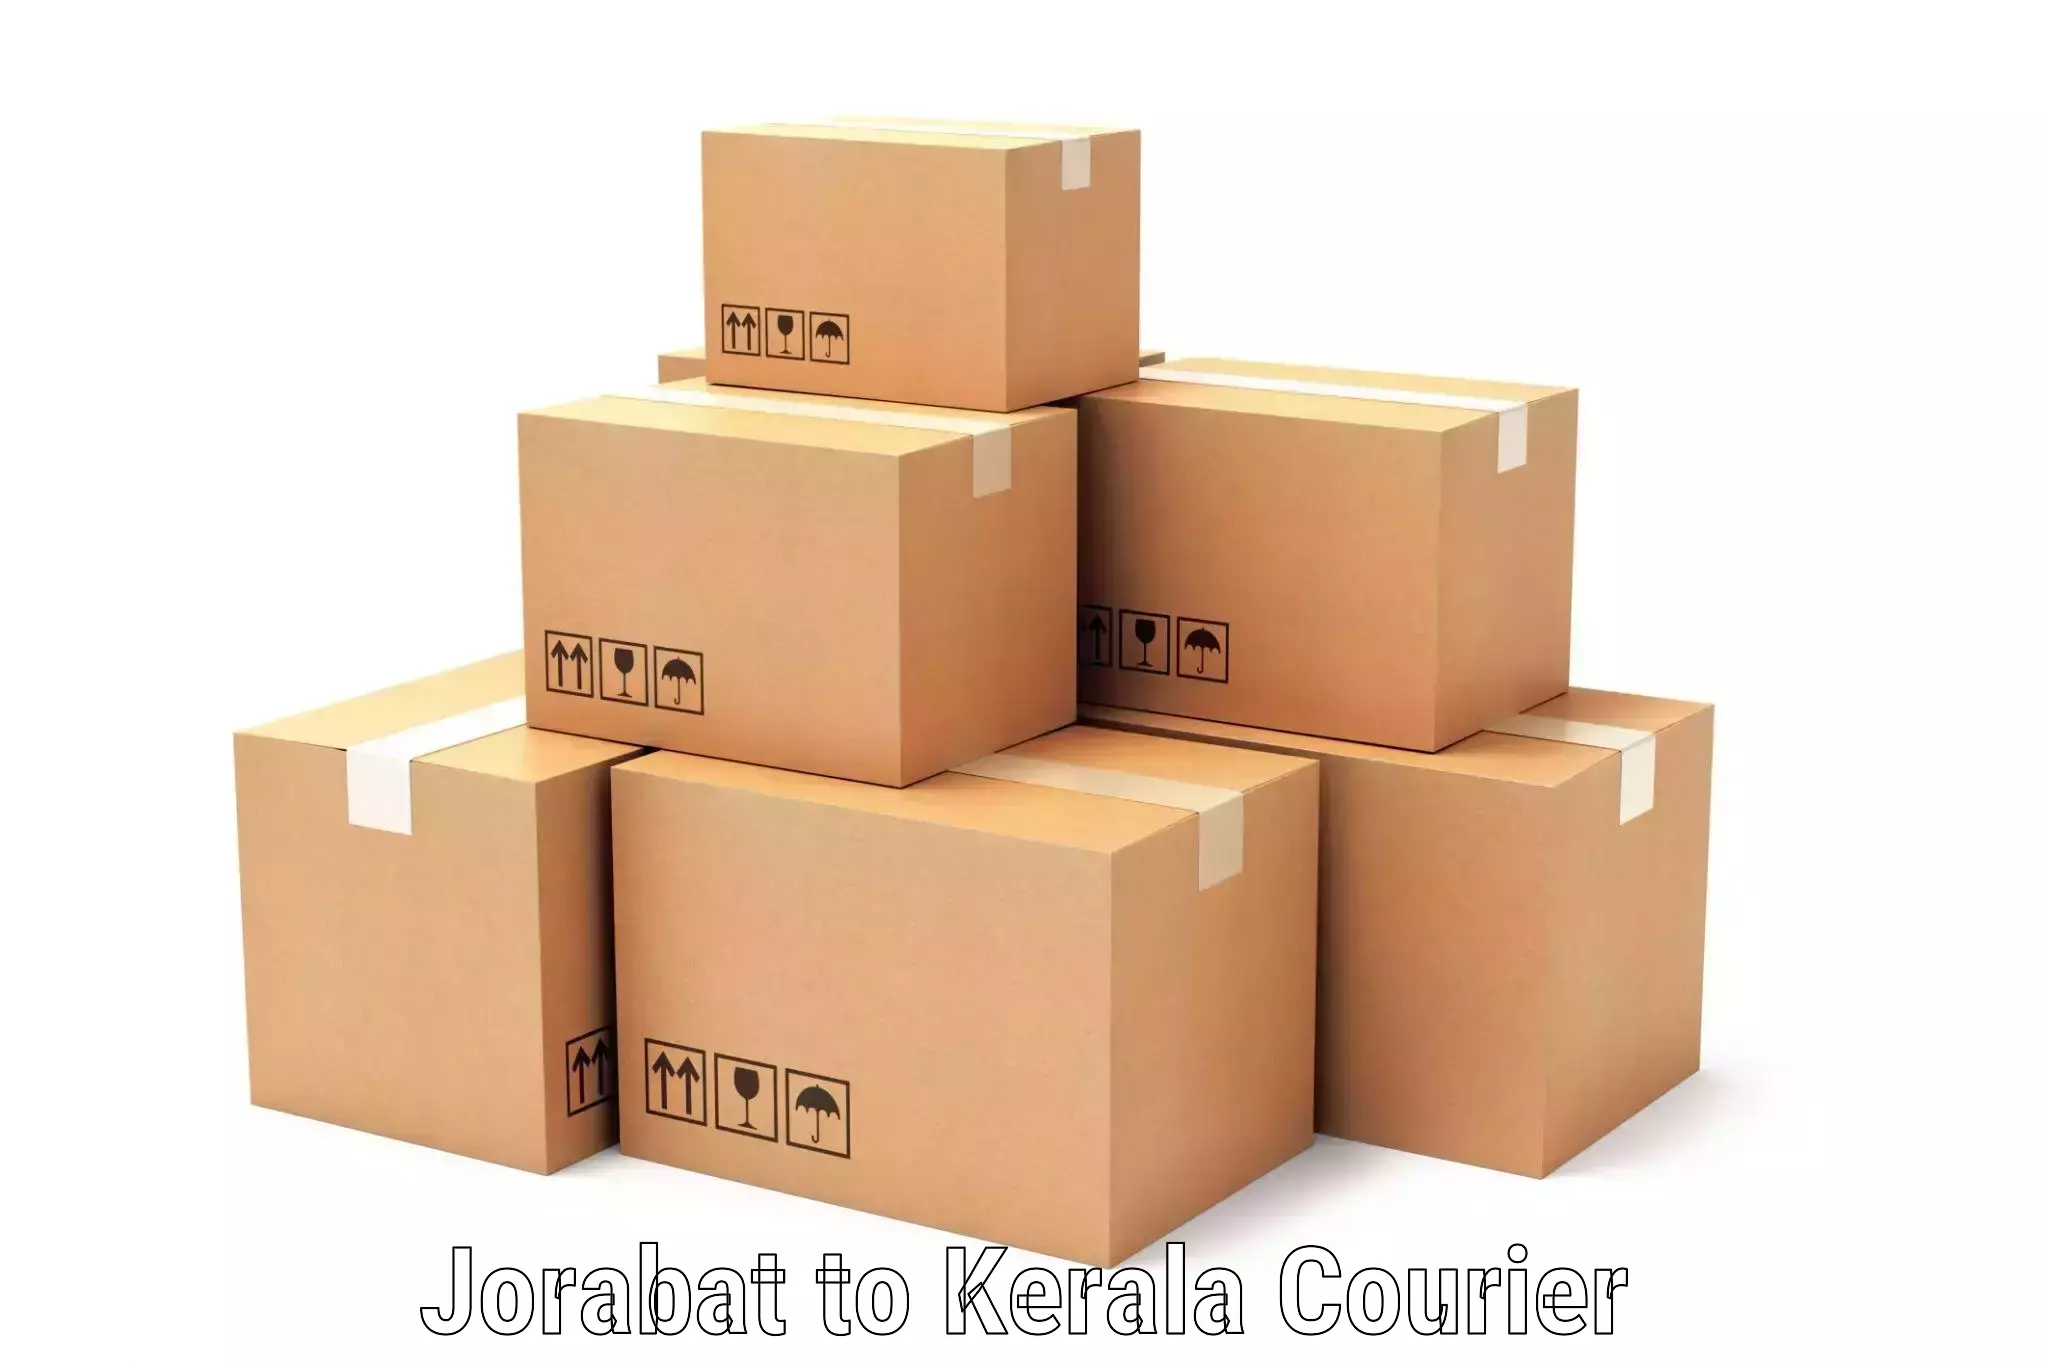 Custom courier packaging Jorabat to Cochin University of Science and Technology